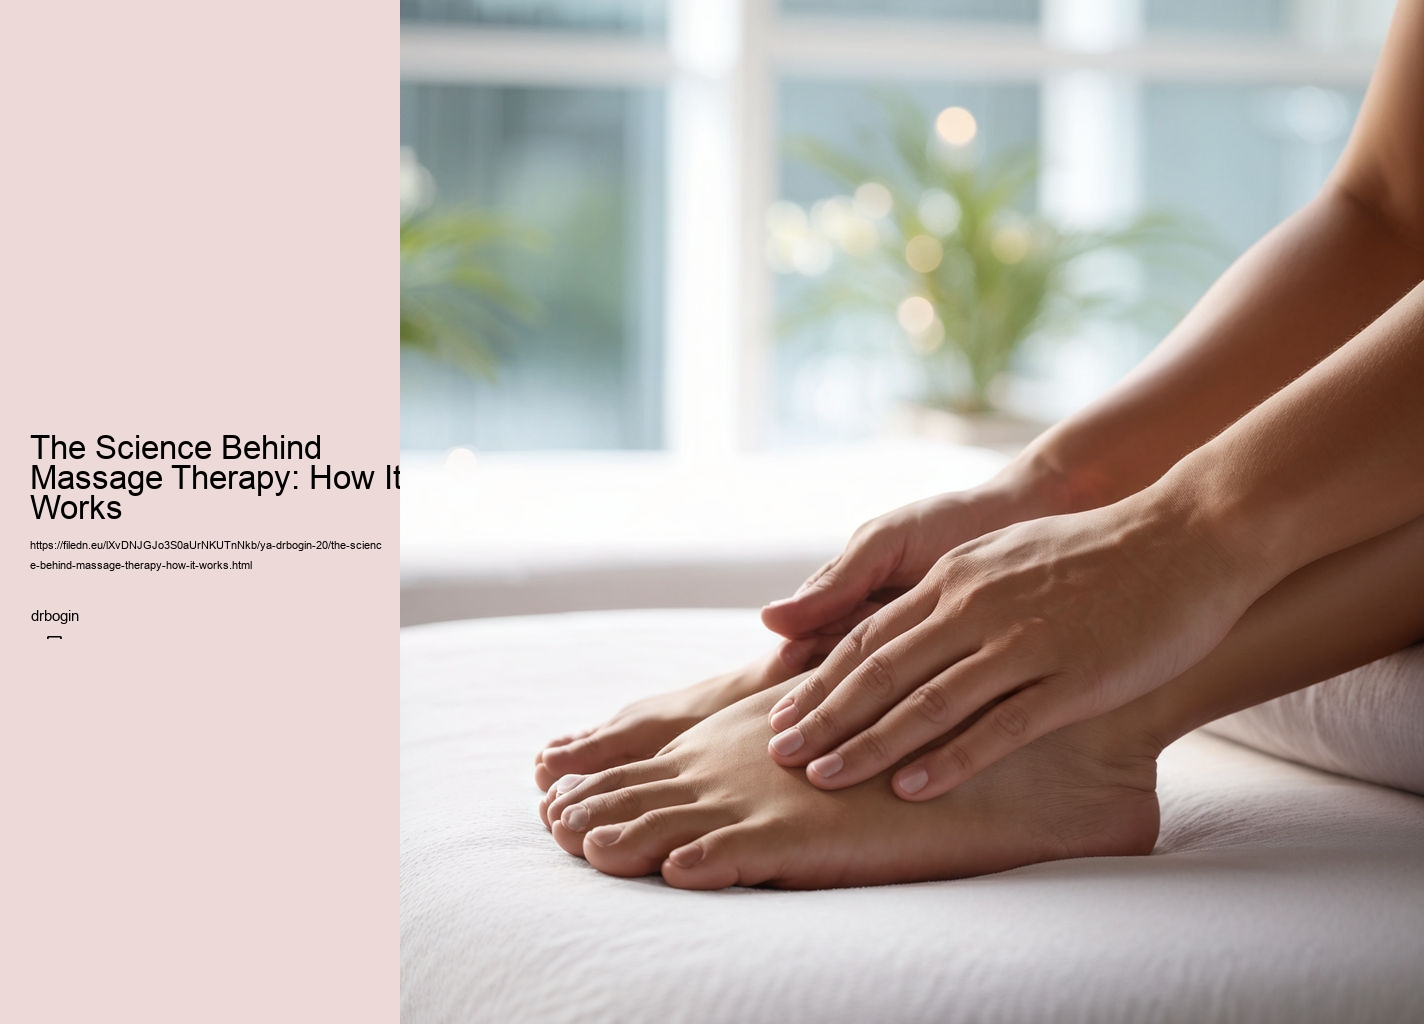 The Science Behind Massage Therapy: How It Works